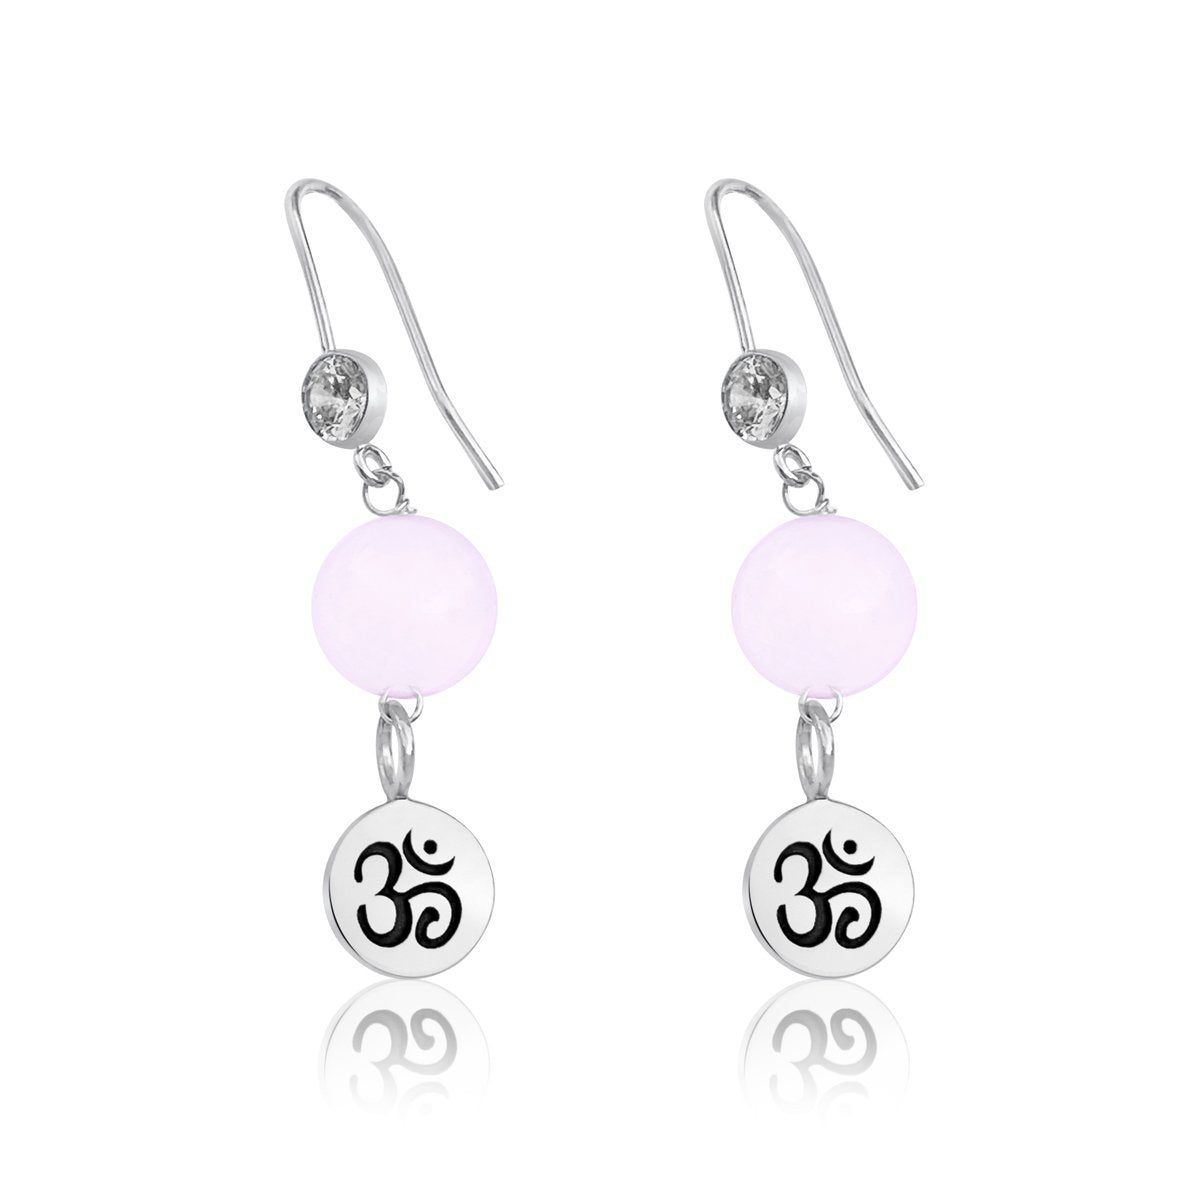 Sterling Silver Yoga Inspired Ohm Earrings with Rose Quartz